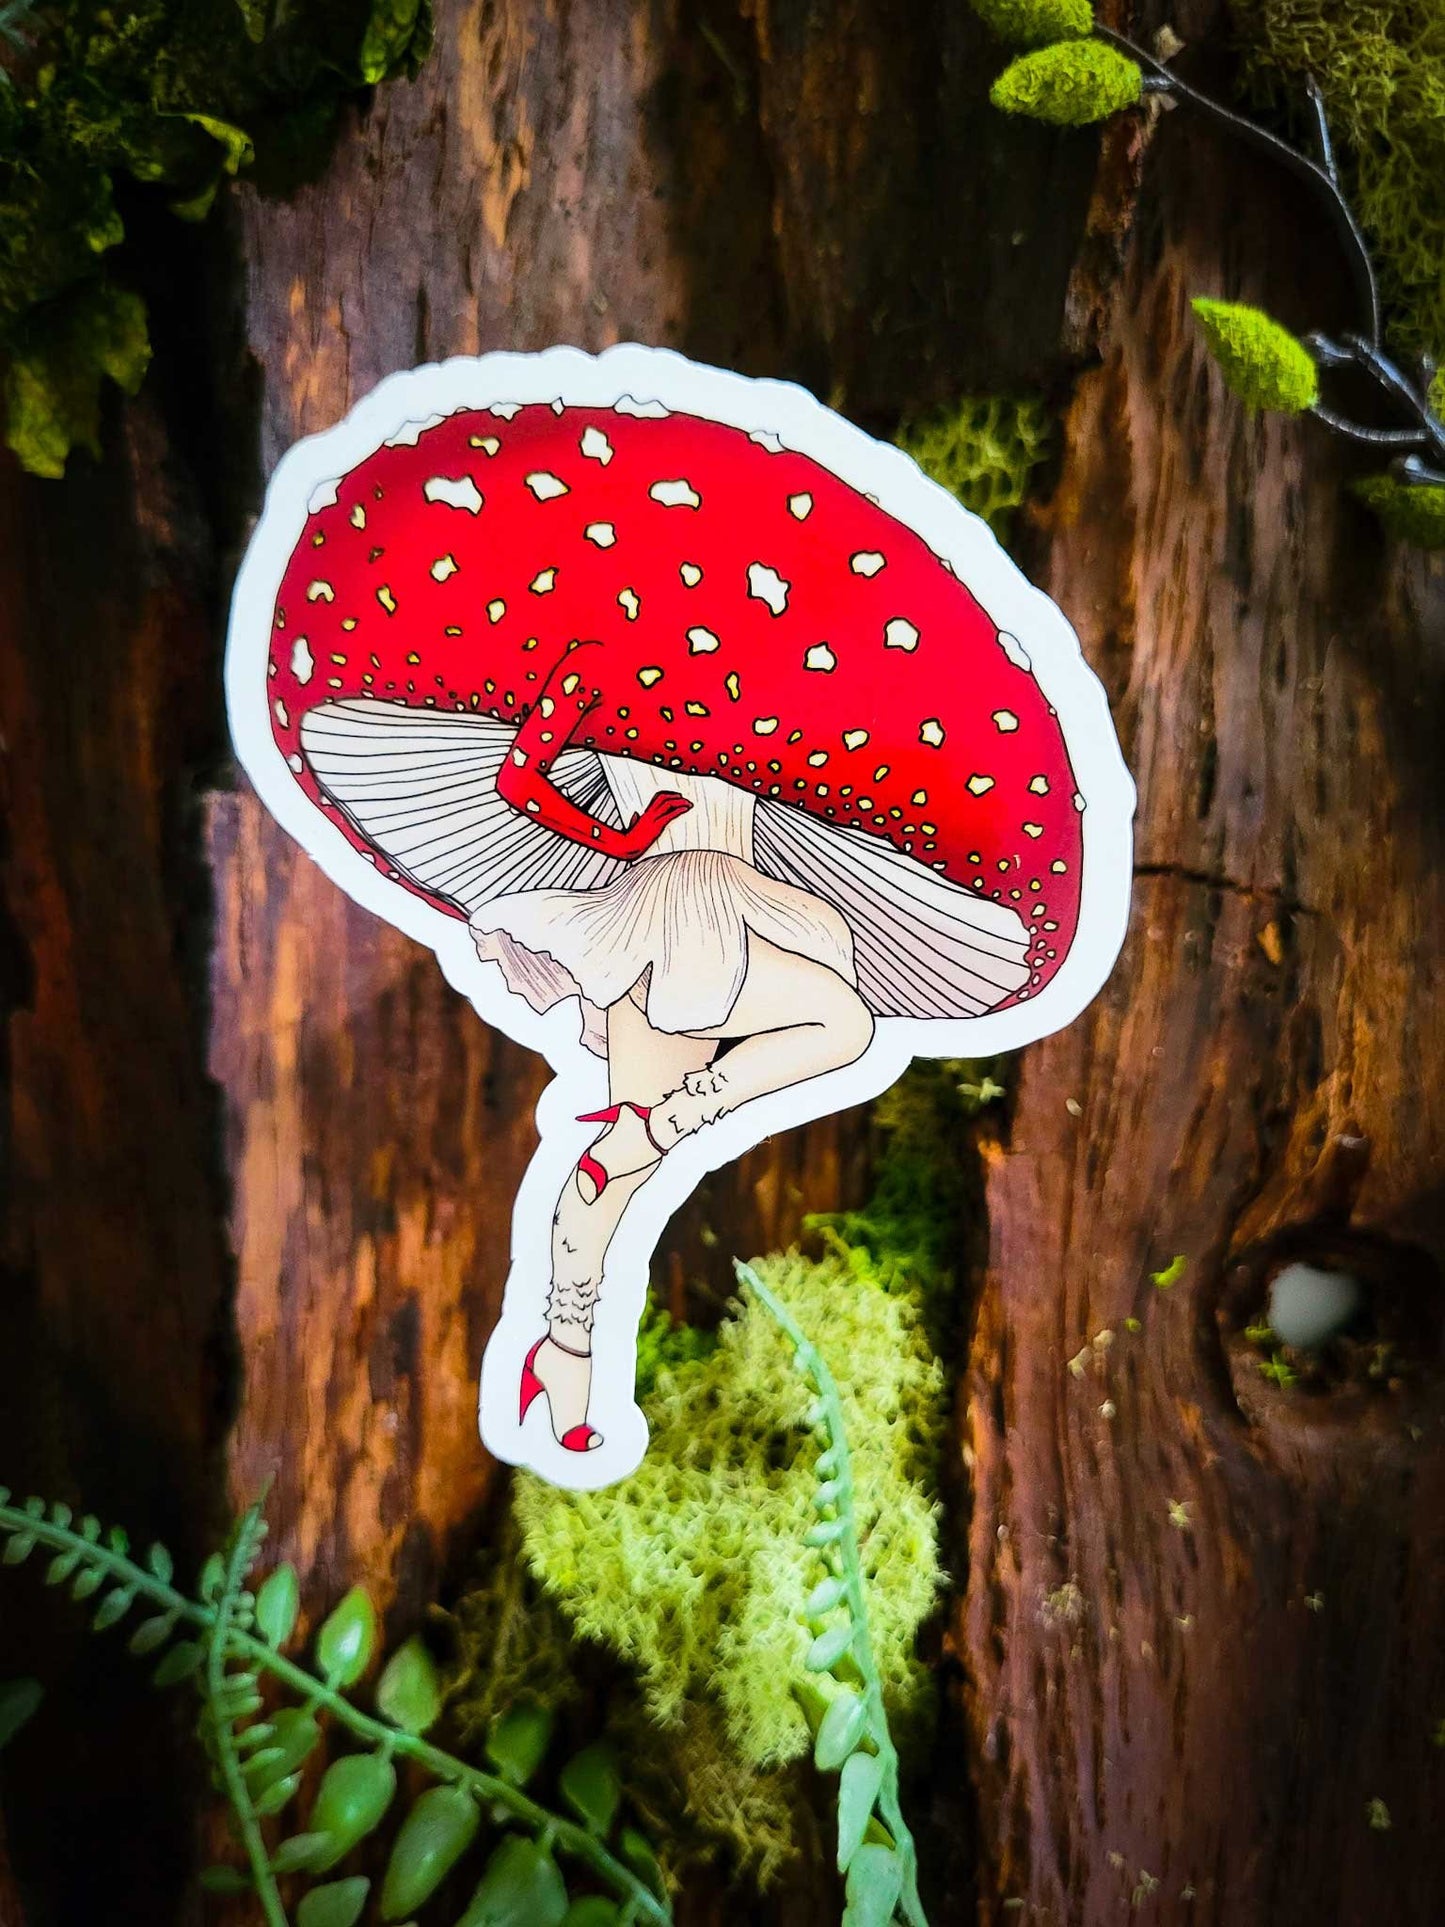 The Full Monty |  Collection of 10 Mushroom Stickers by Suzi McCrae